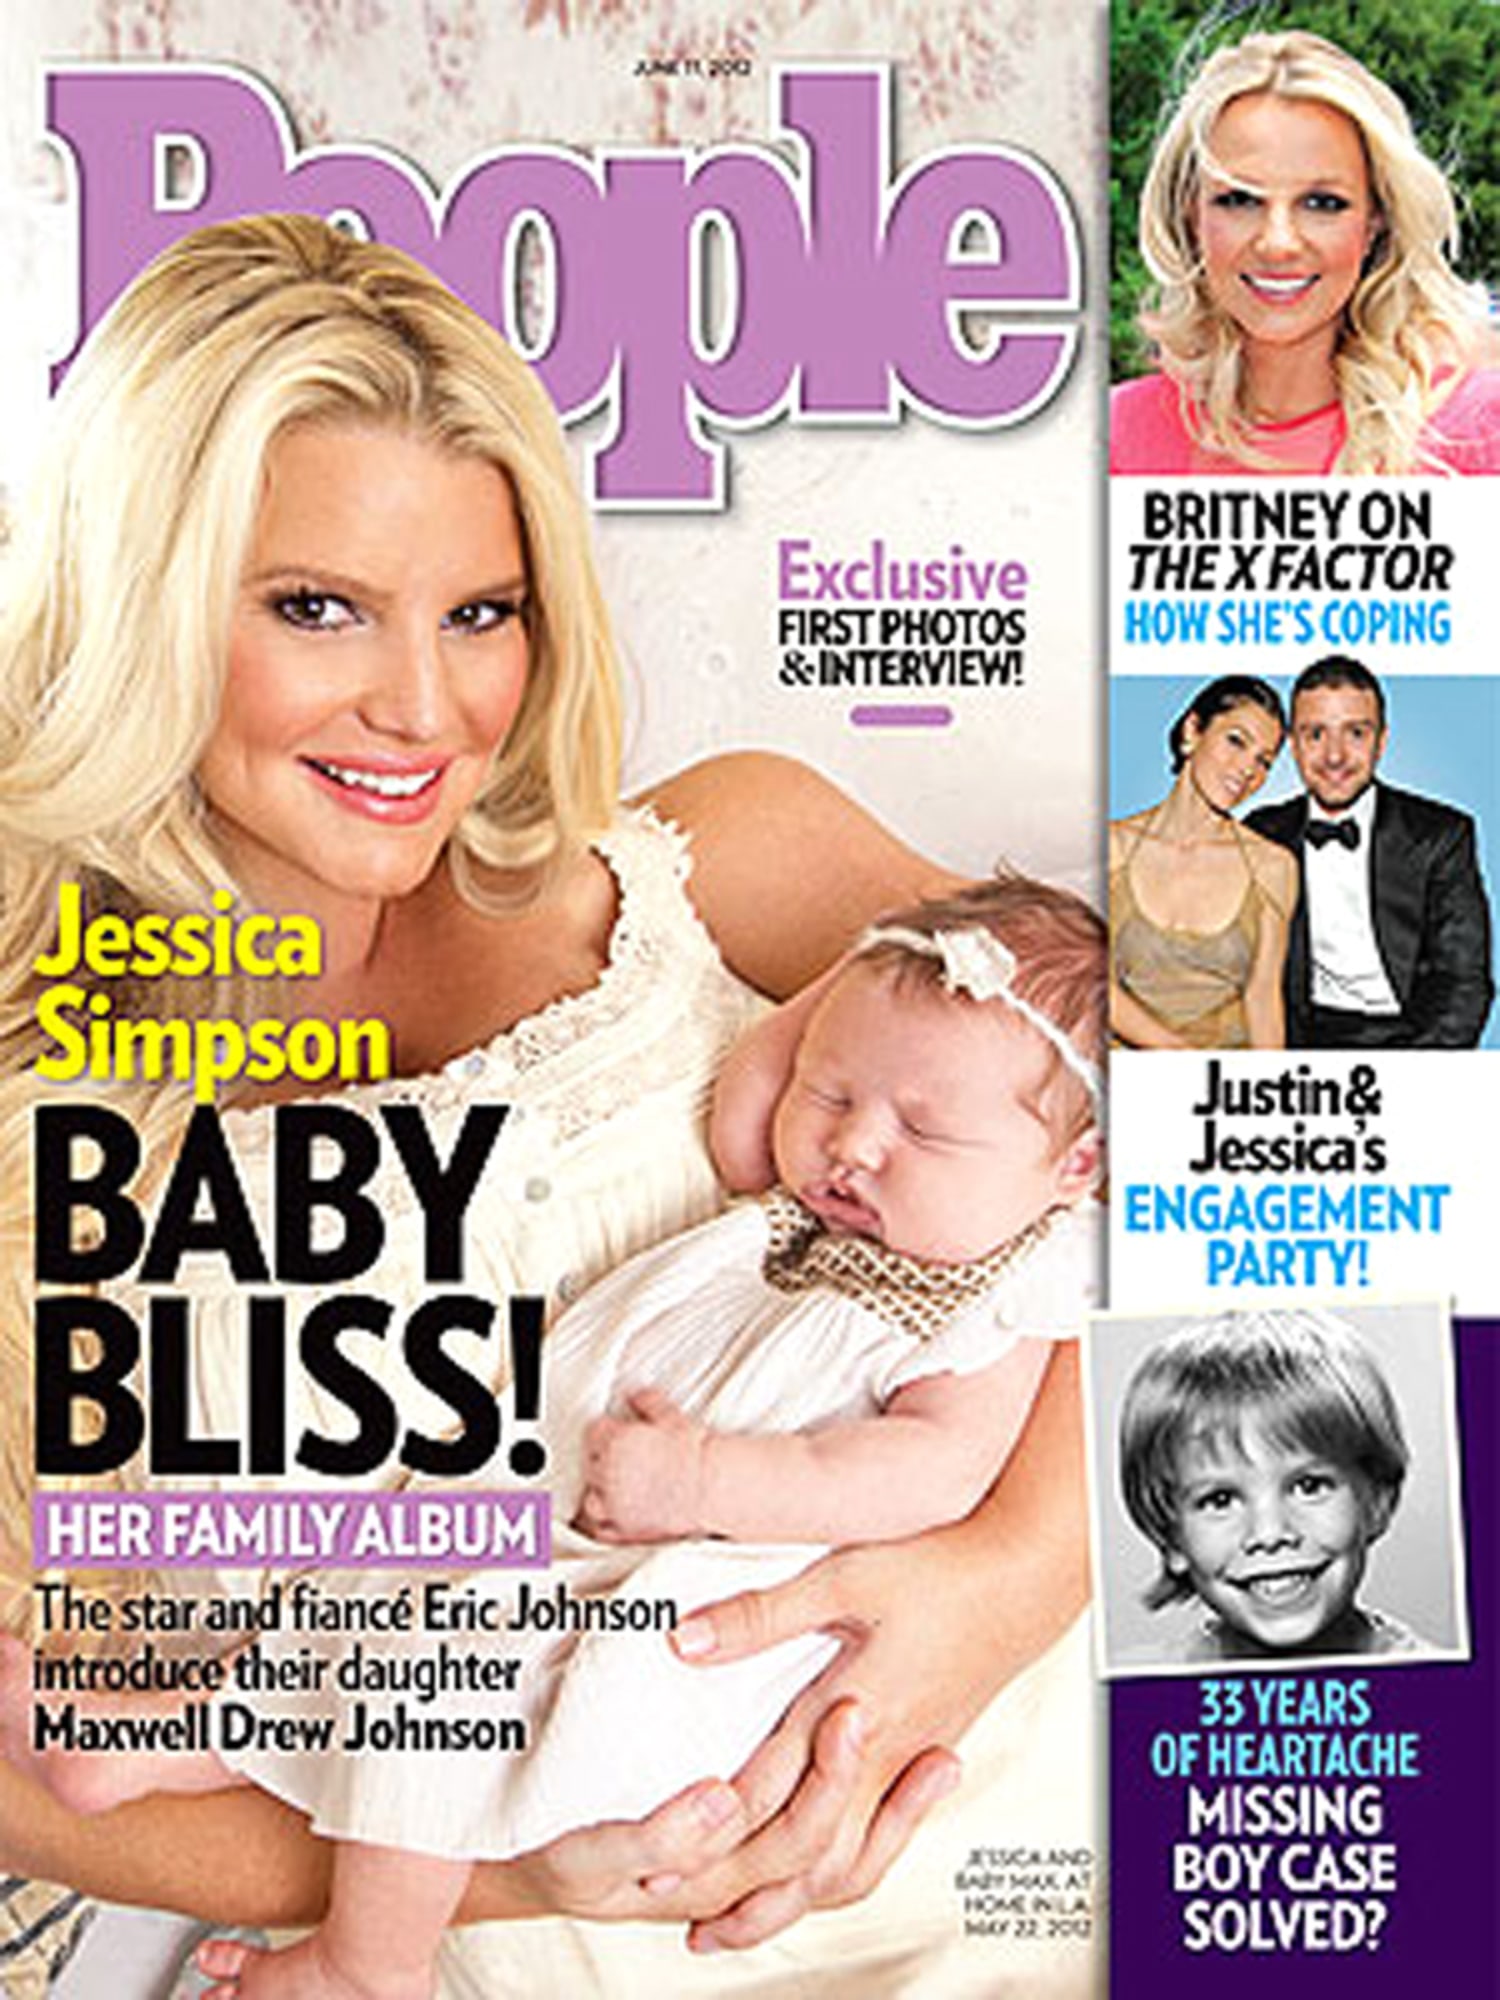 Jessica Simpson Body After Baby: Pictures